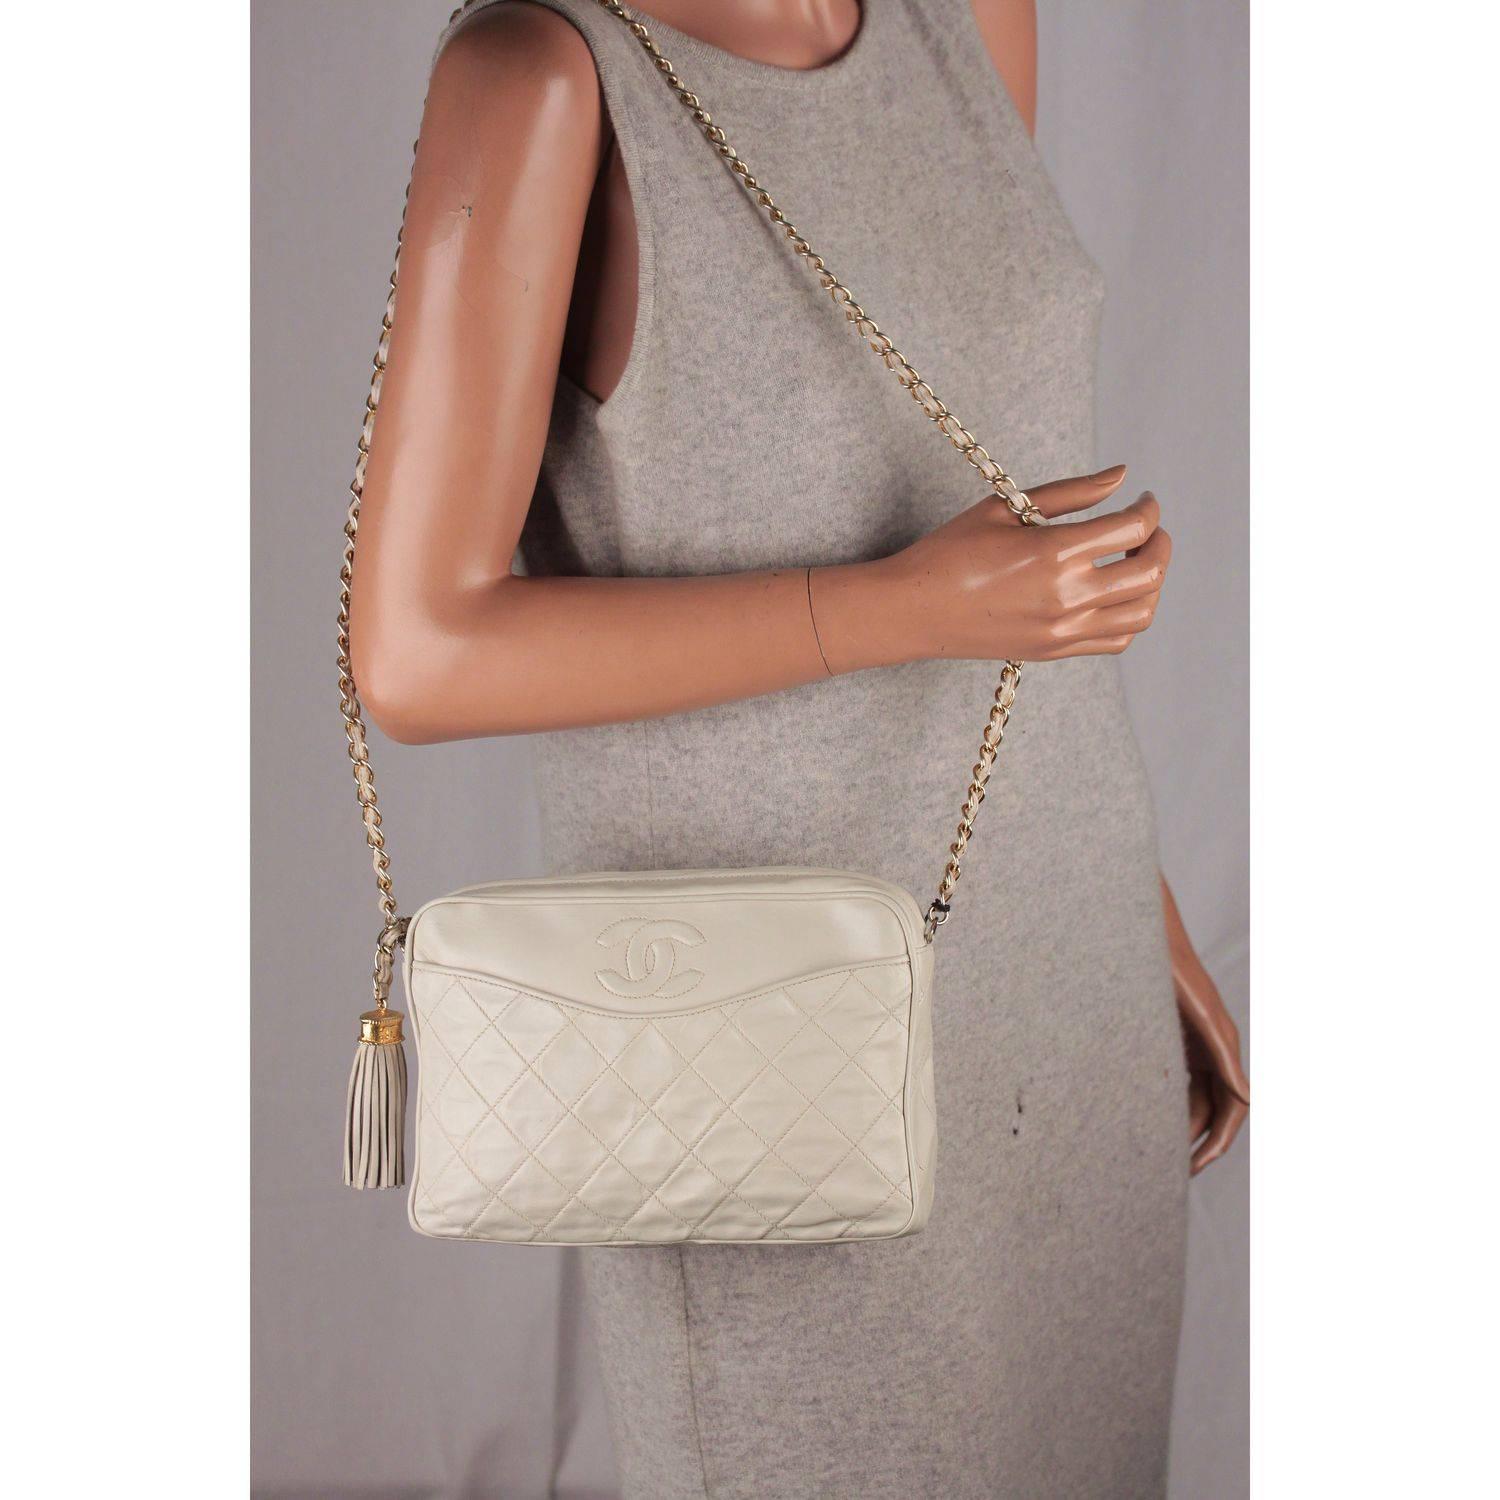 Beige CHANEL Vintage Ivory QUILTED Leather CC Stitch CAMERA BAG w/ Tassel